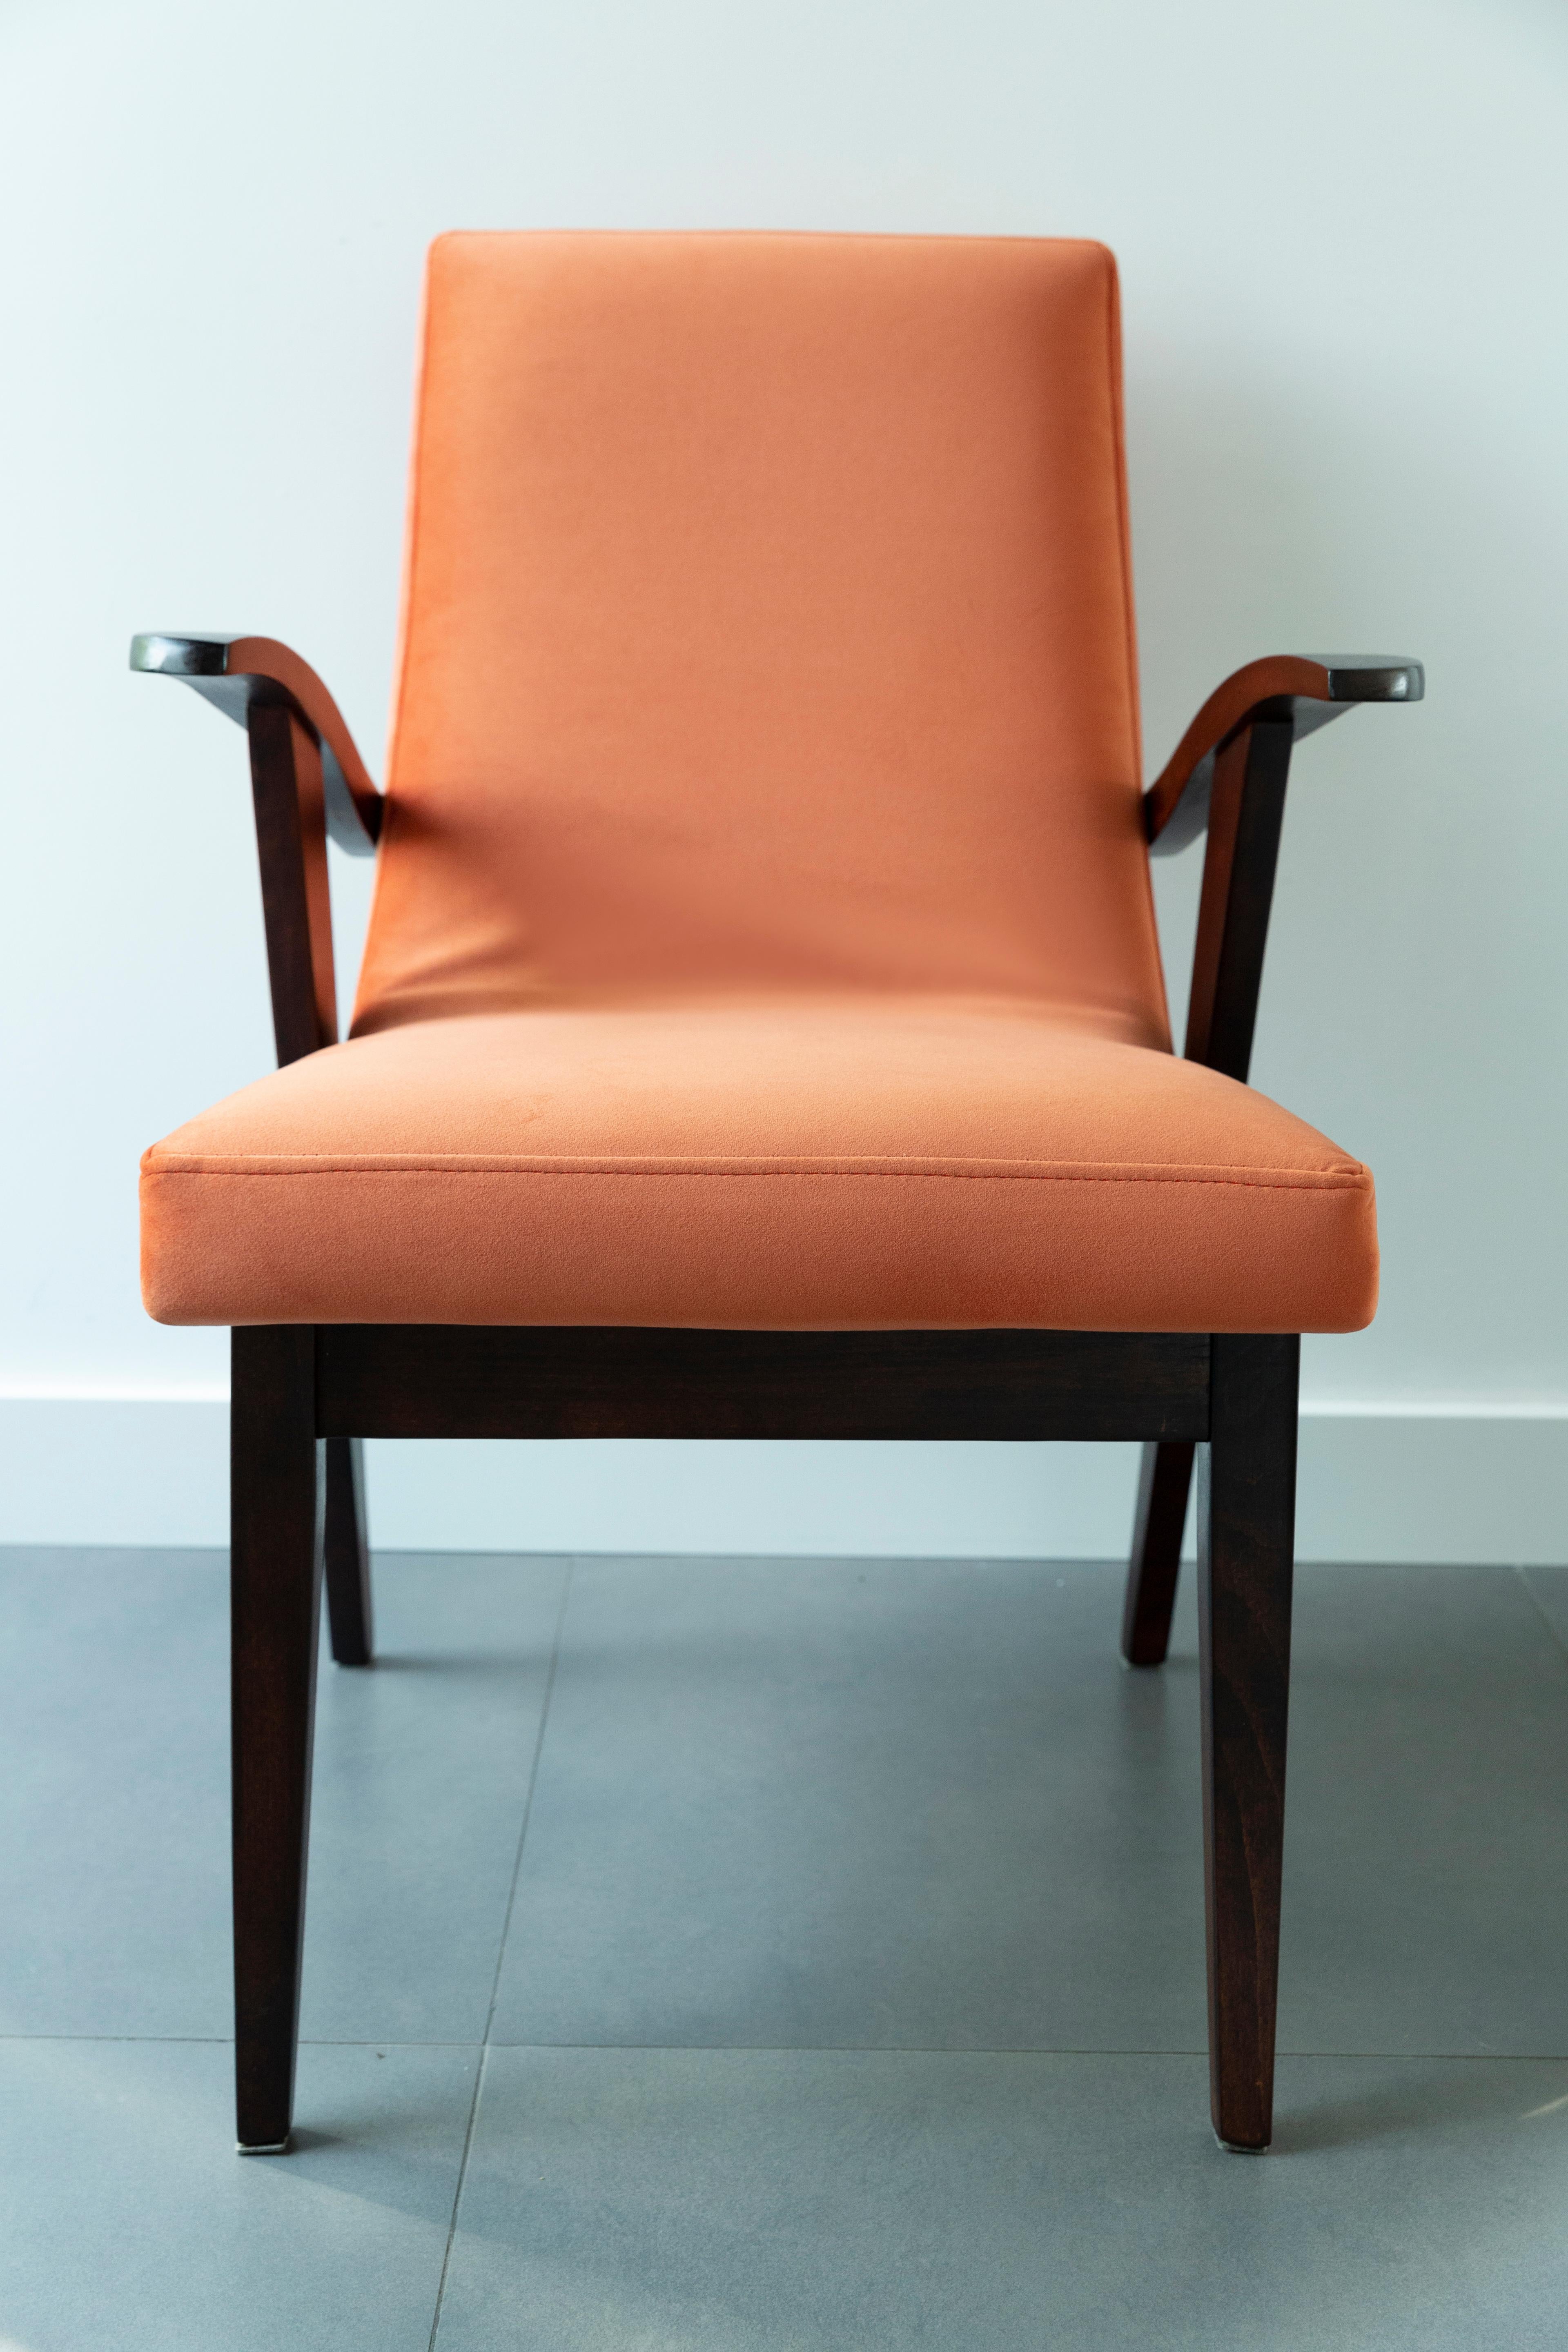 Set of Four Vintage Chairs in Orange Velvet by Mieczyslaw Puchala, 1960s For Sale 3